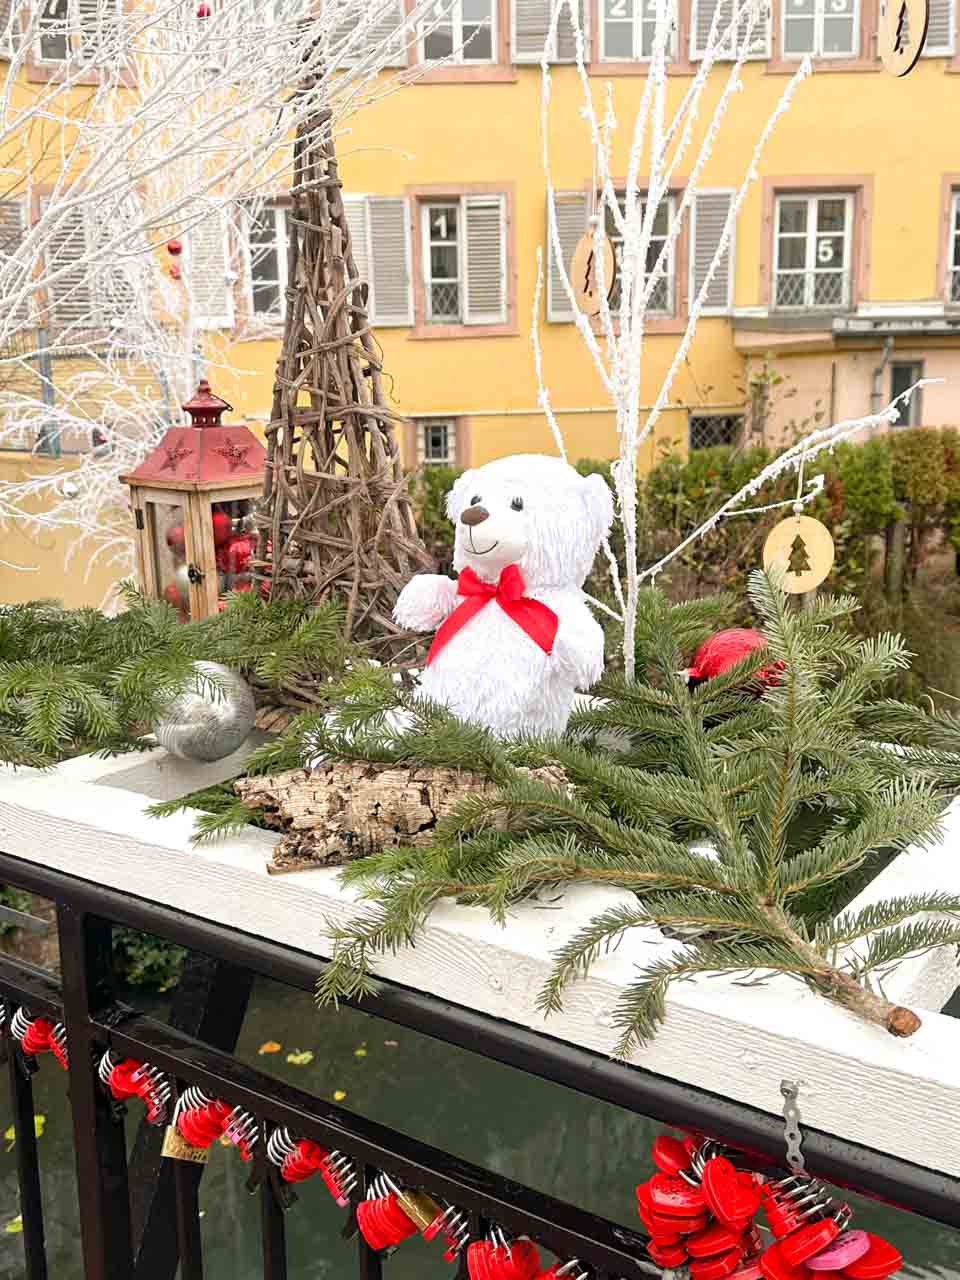 A white teddy bear with a red bow, surrounded by Christmas greenery and ornaments, on a decorated bridge railing in the Petite Venise area of Colmar